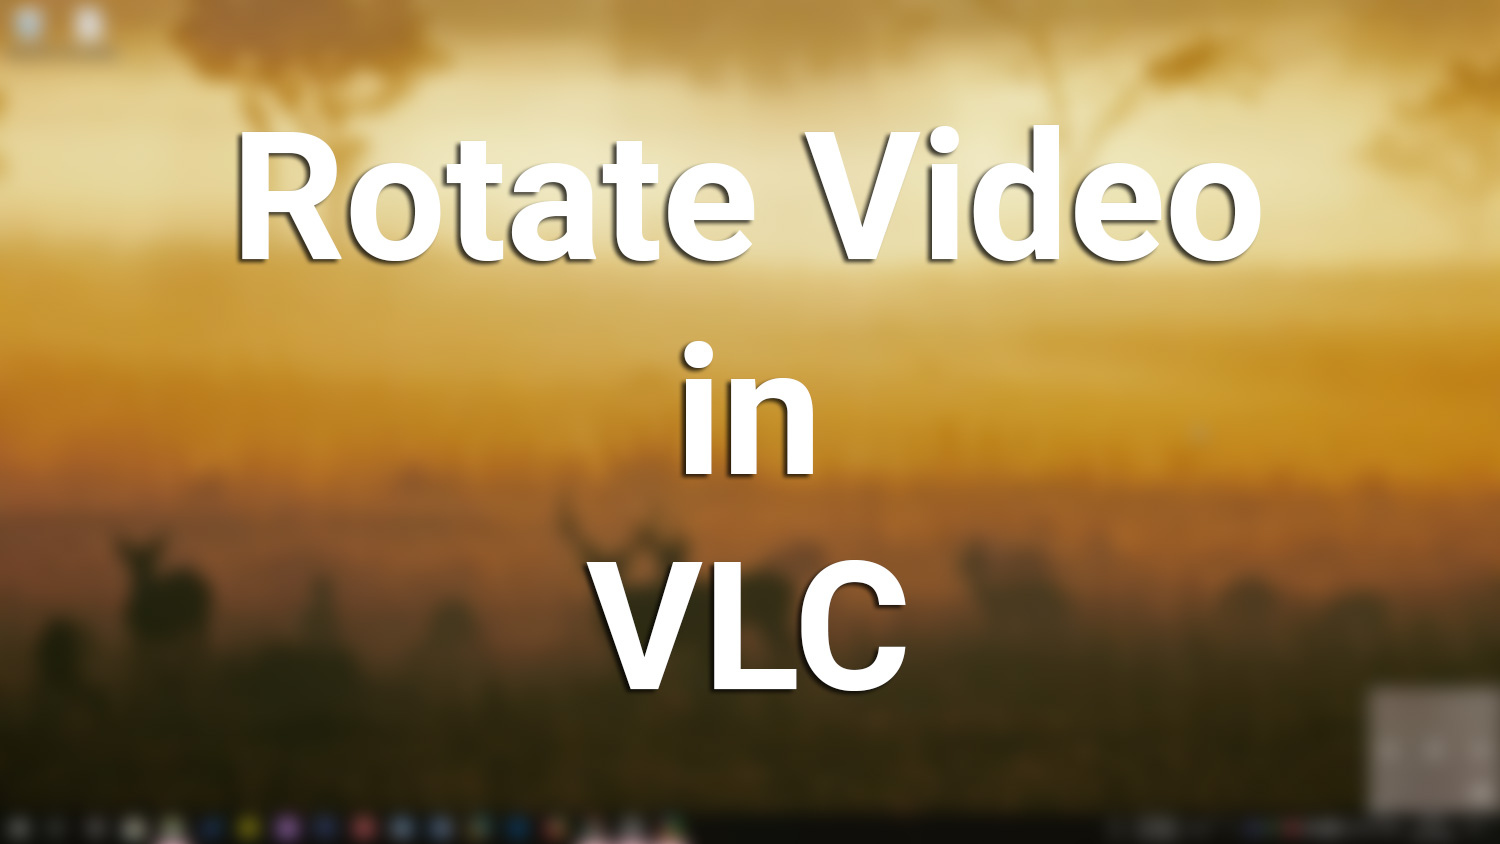 how to rotate a video on vlc media player and save it